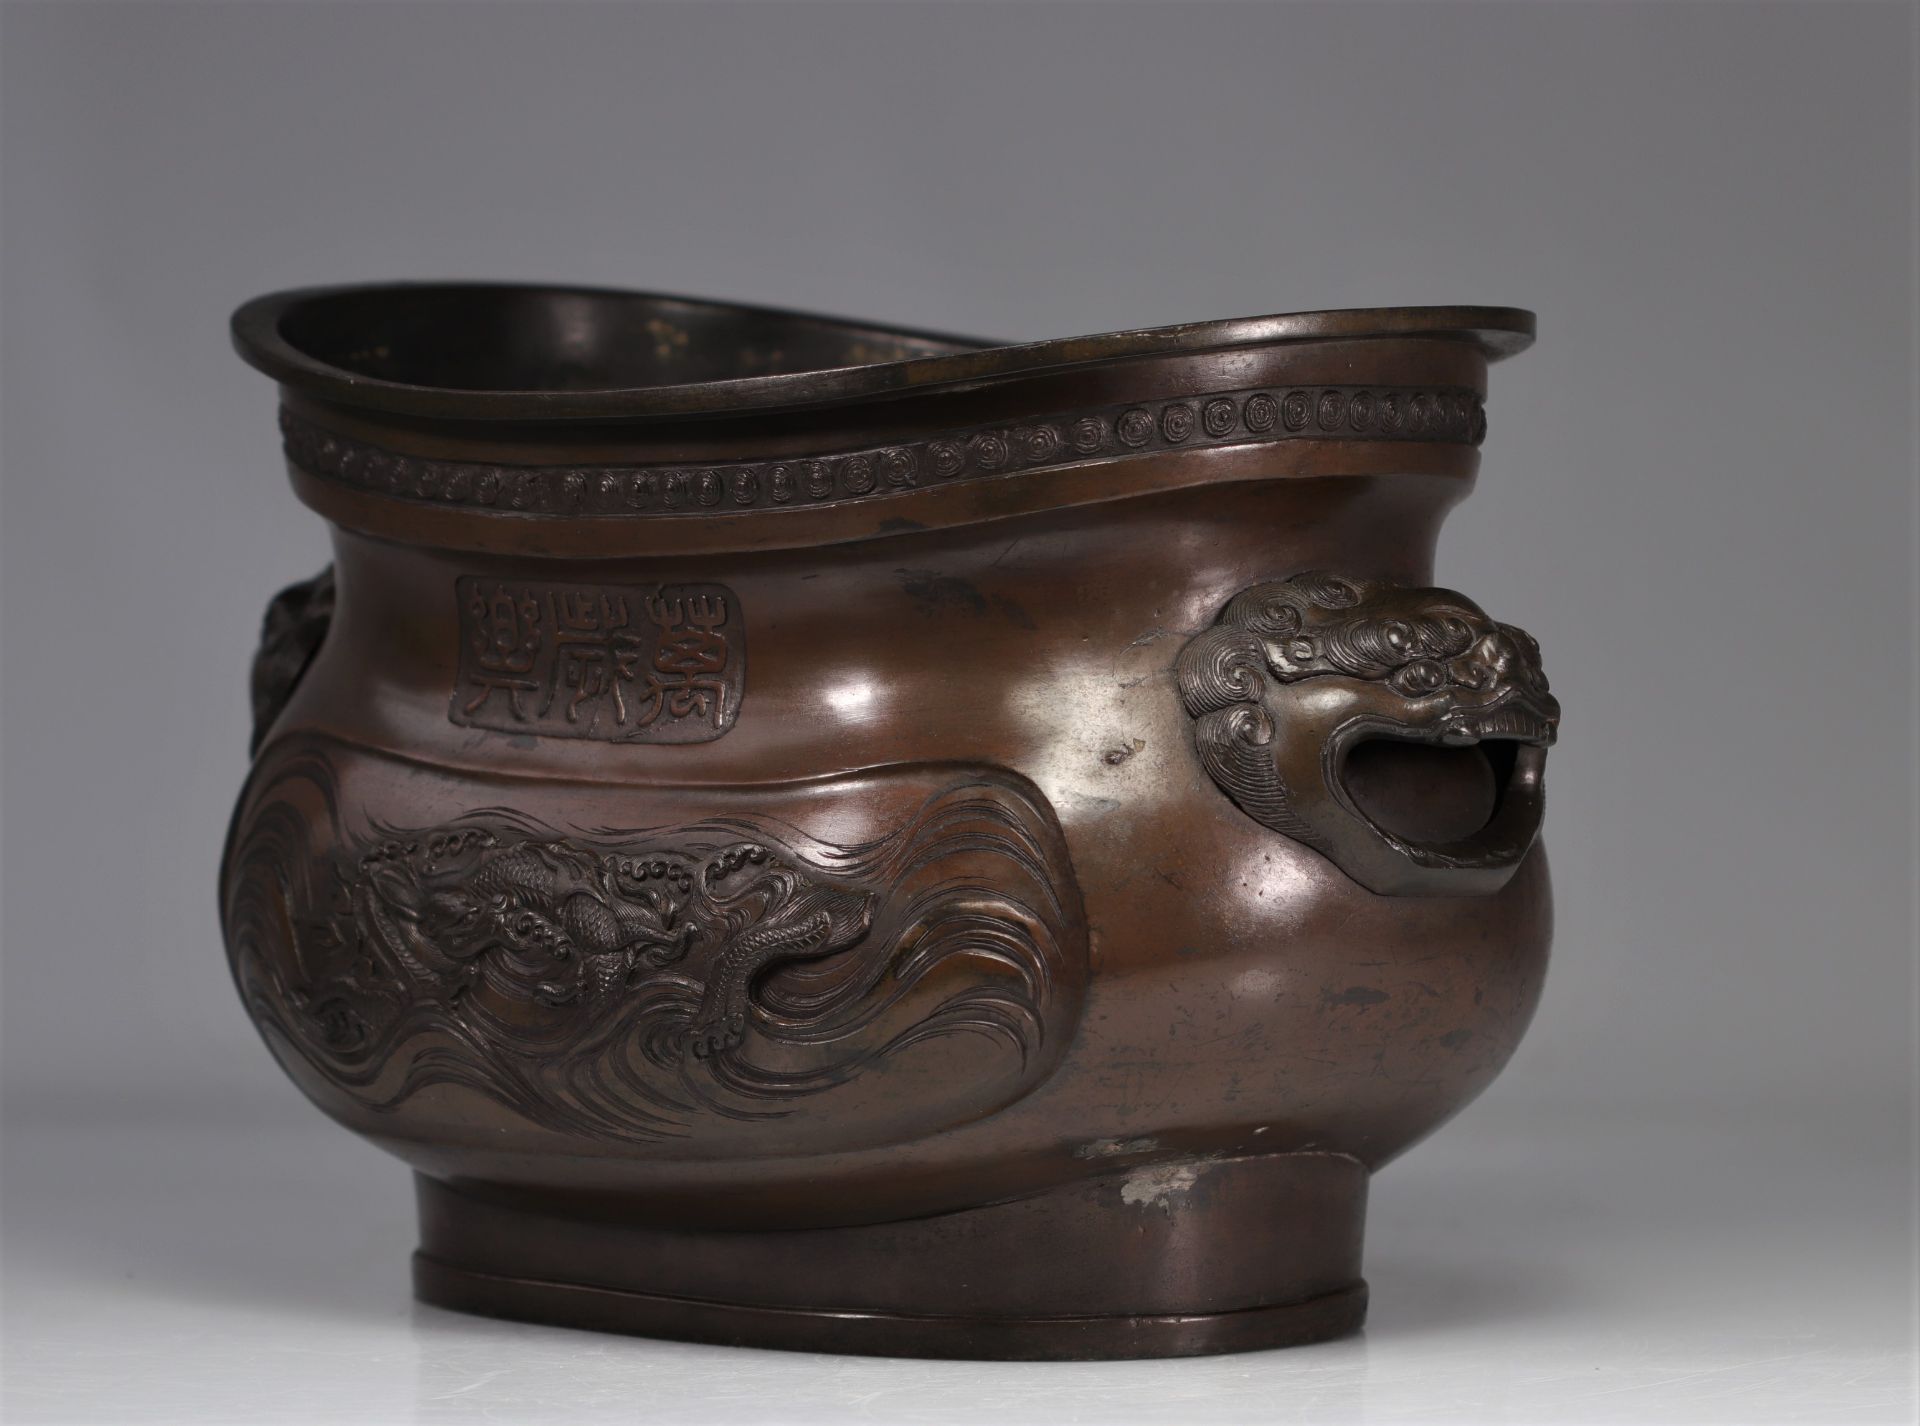 Japanese bronze planter decorated with dragons from 19th century - Image 2 of 5